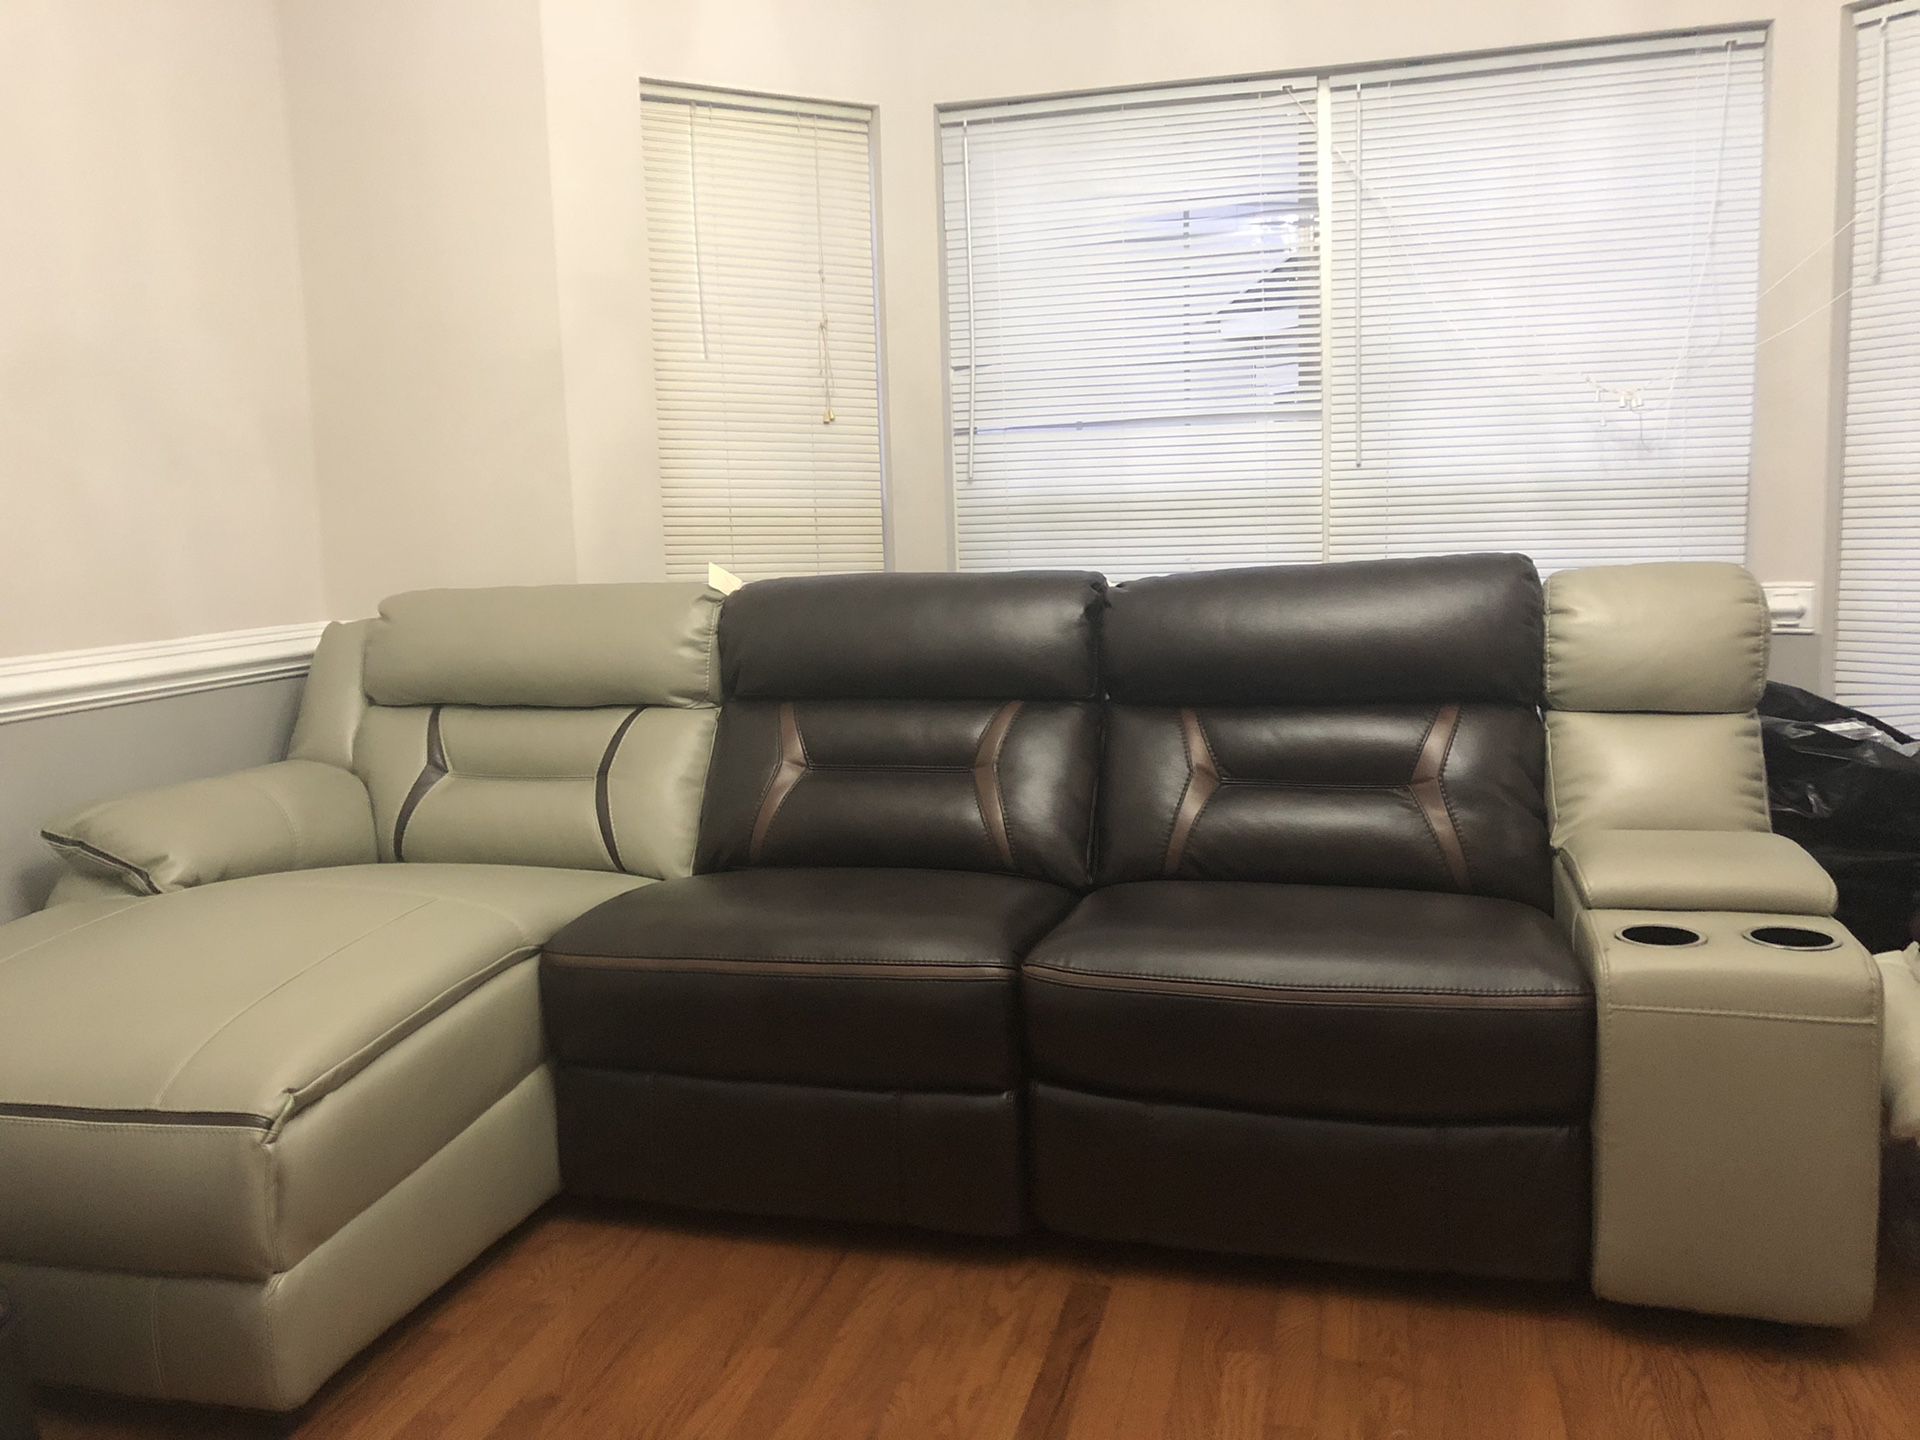 Brand new recliner chase sectional